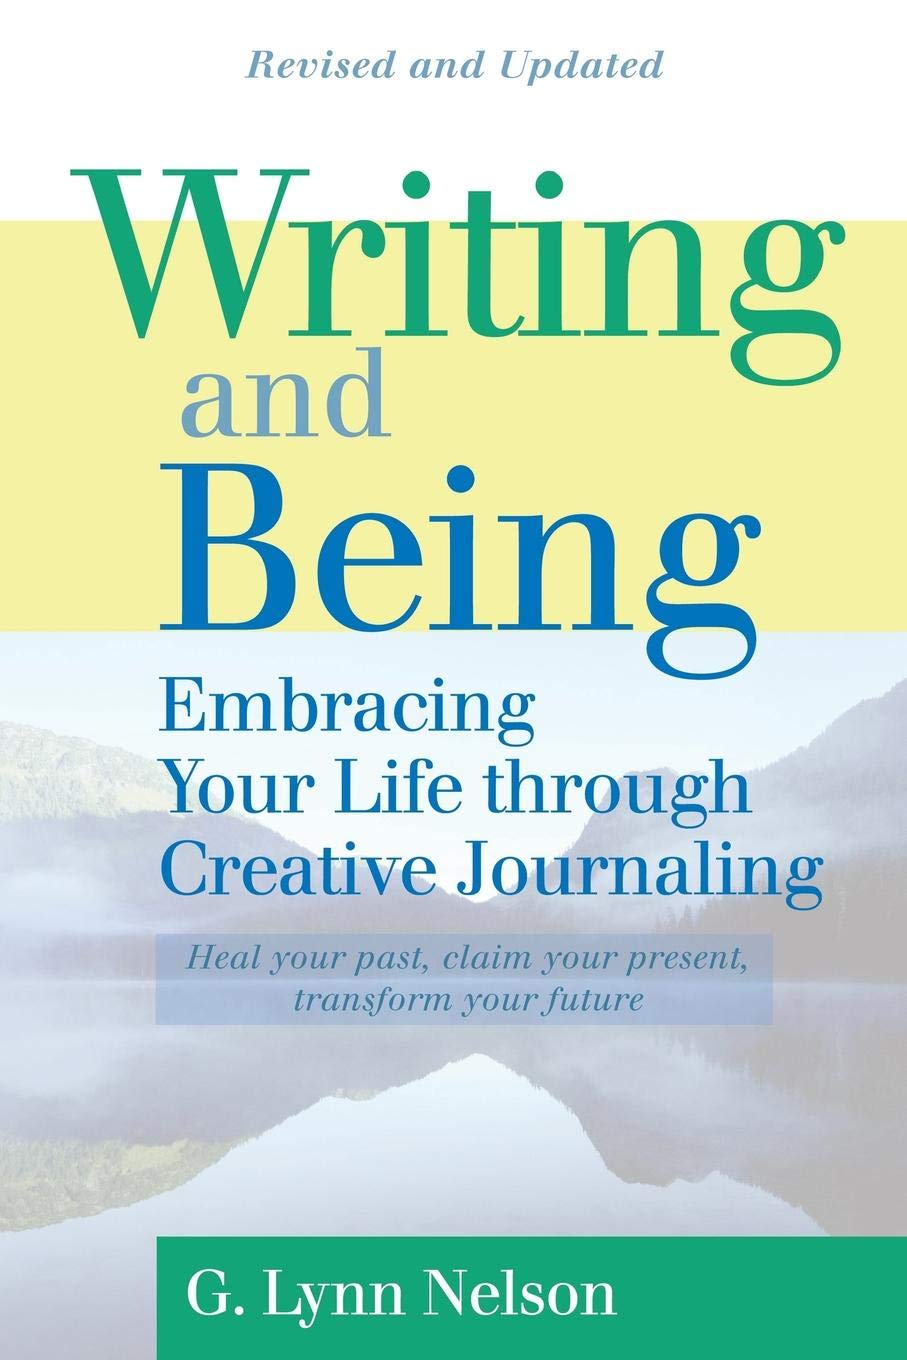 Amazon affiliate link to Writing and Being: Embracing Your Life Through Creative Journaling by G. Lynn Nelson 